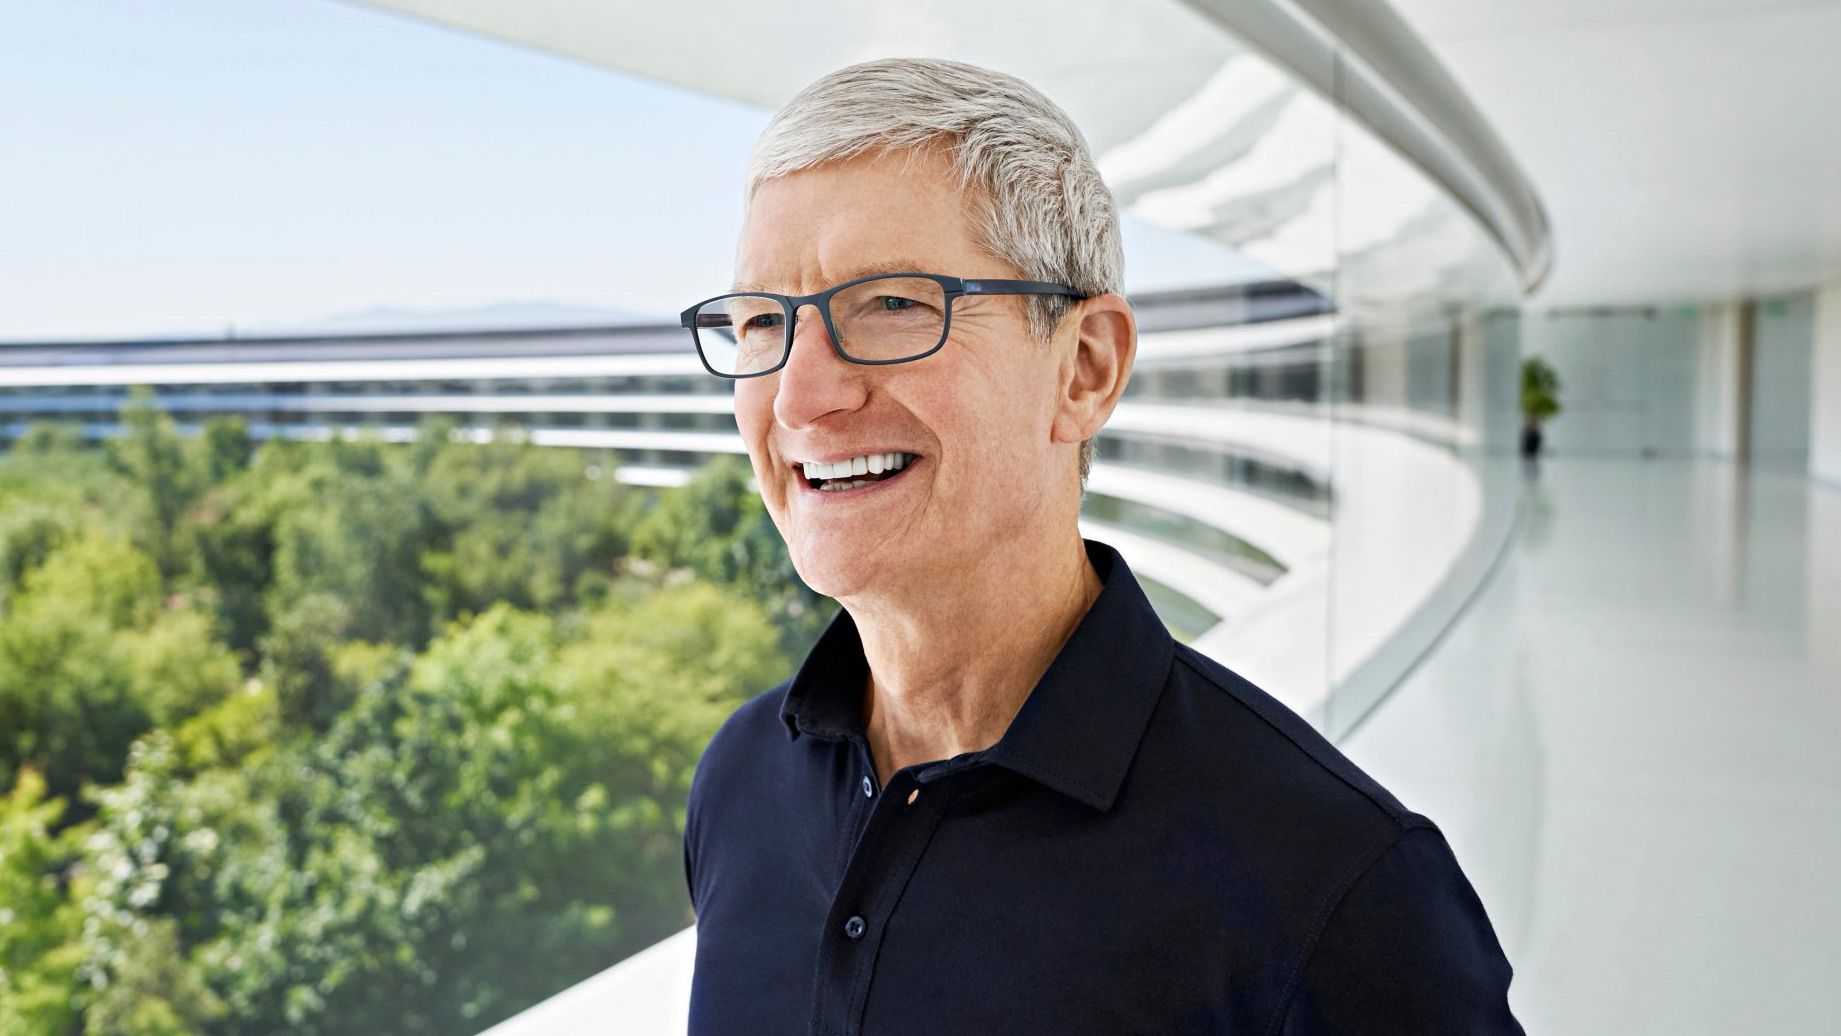 Tim Cook Reveals He Owns Cryptocurrency and Has Been 'Interested in It For a While'